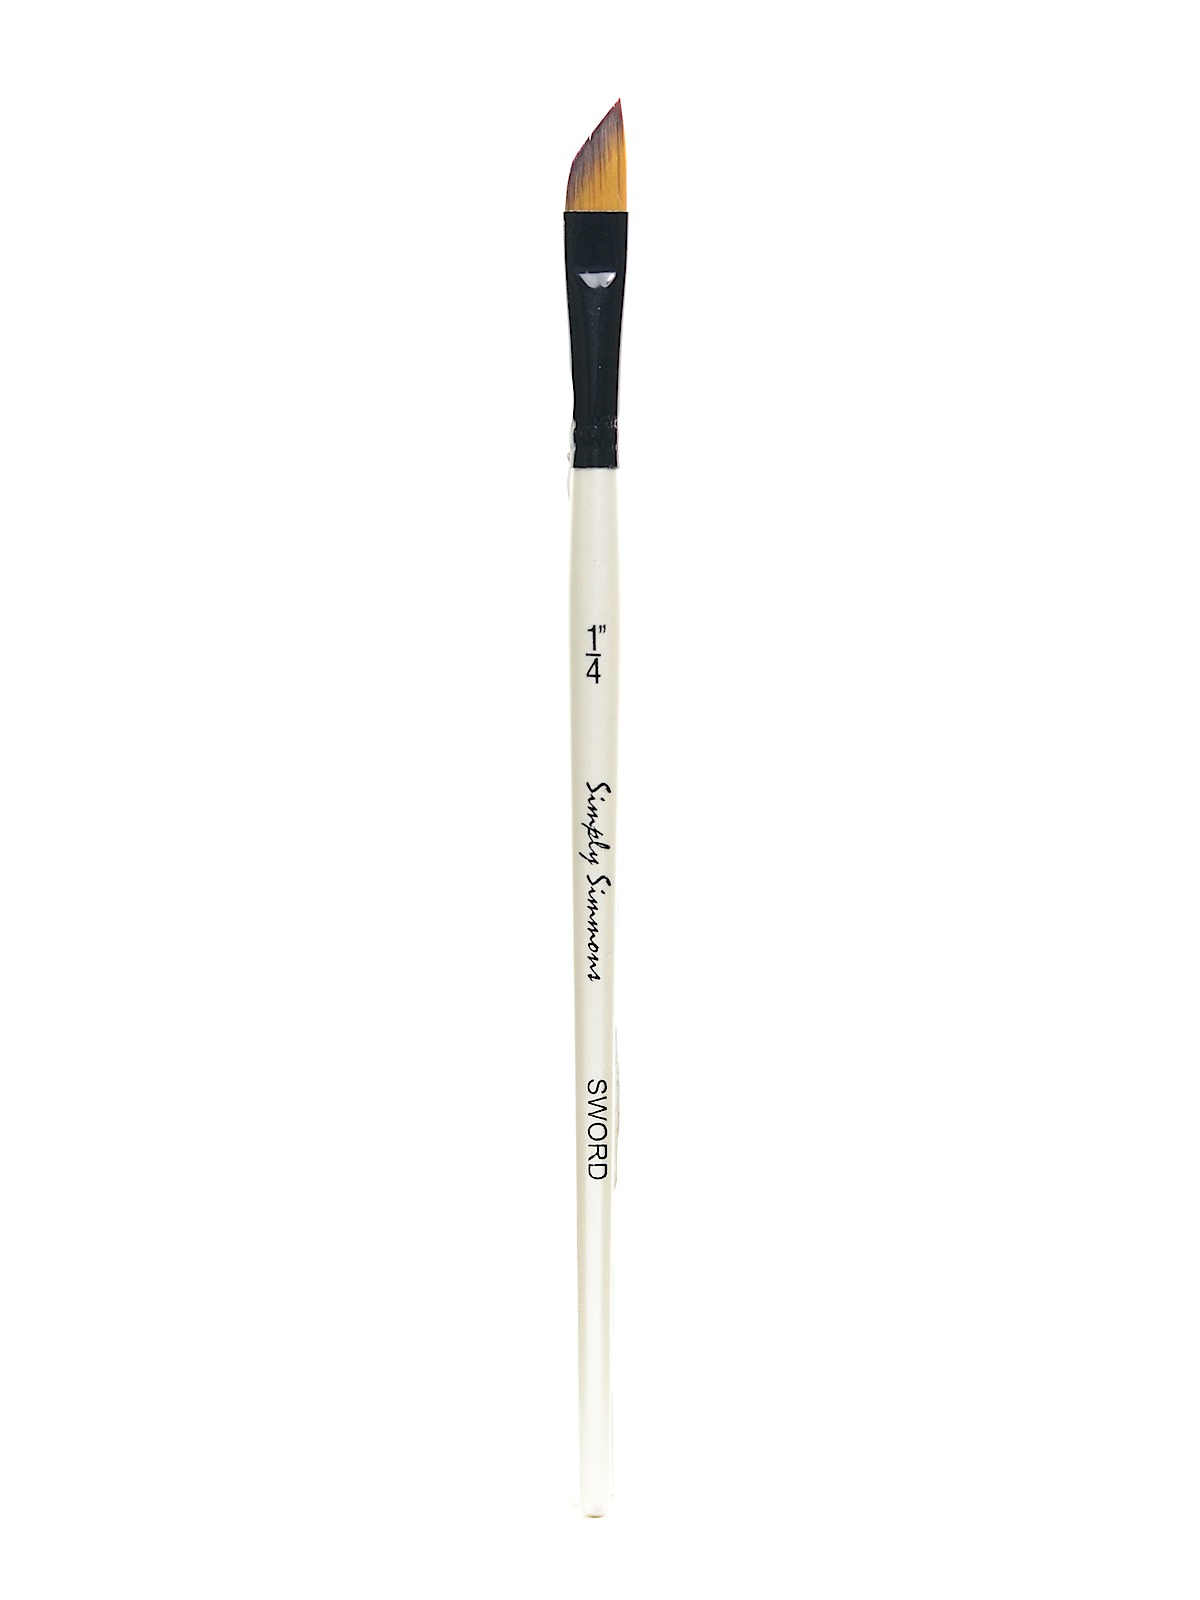 Simply Simmons Short Handle Brushes Sword 1 4 In.